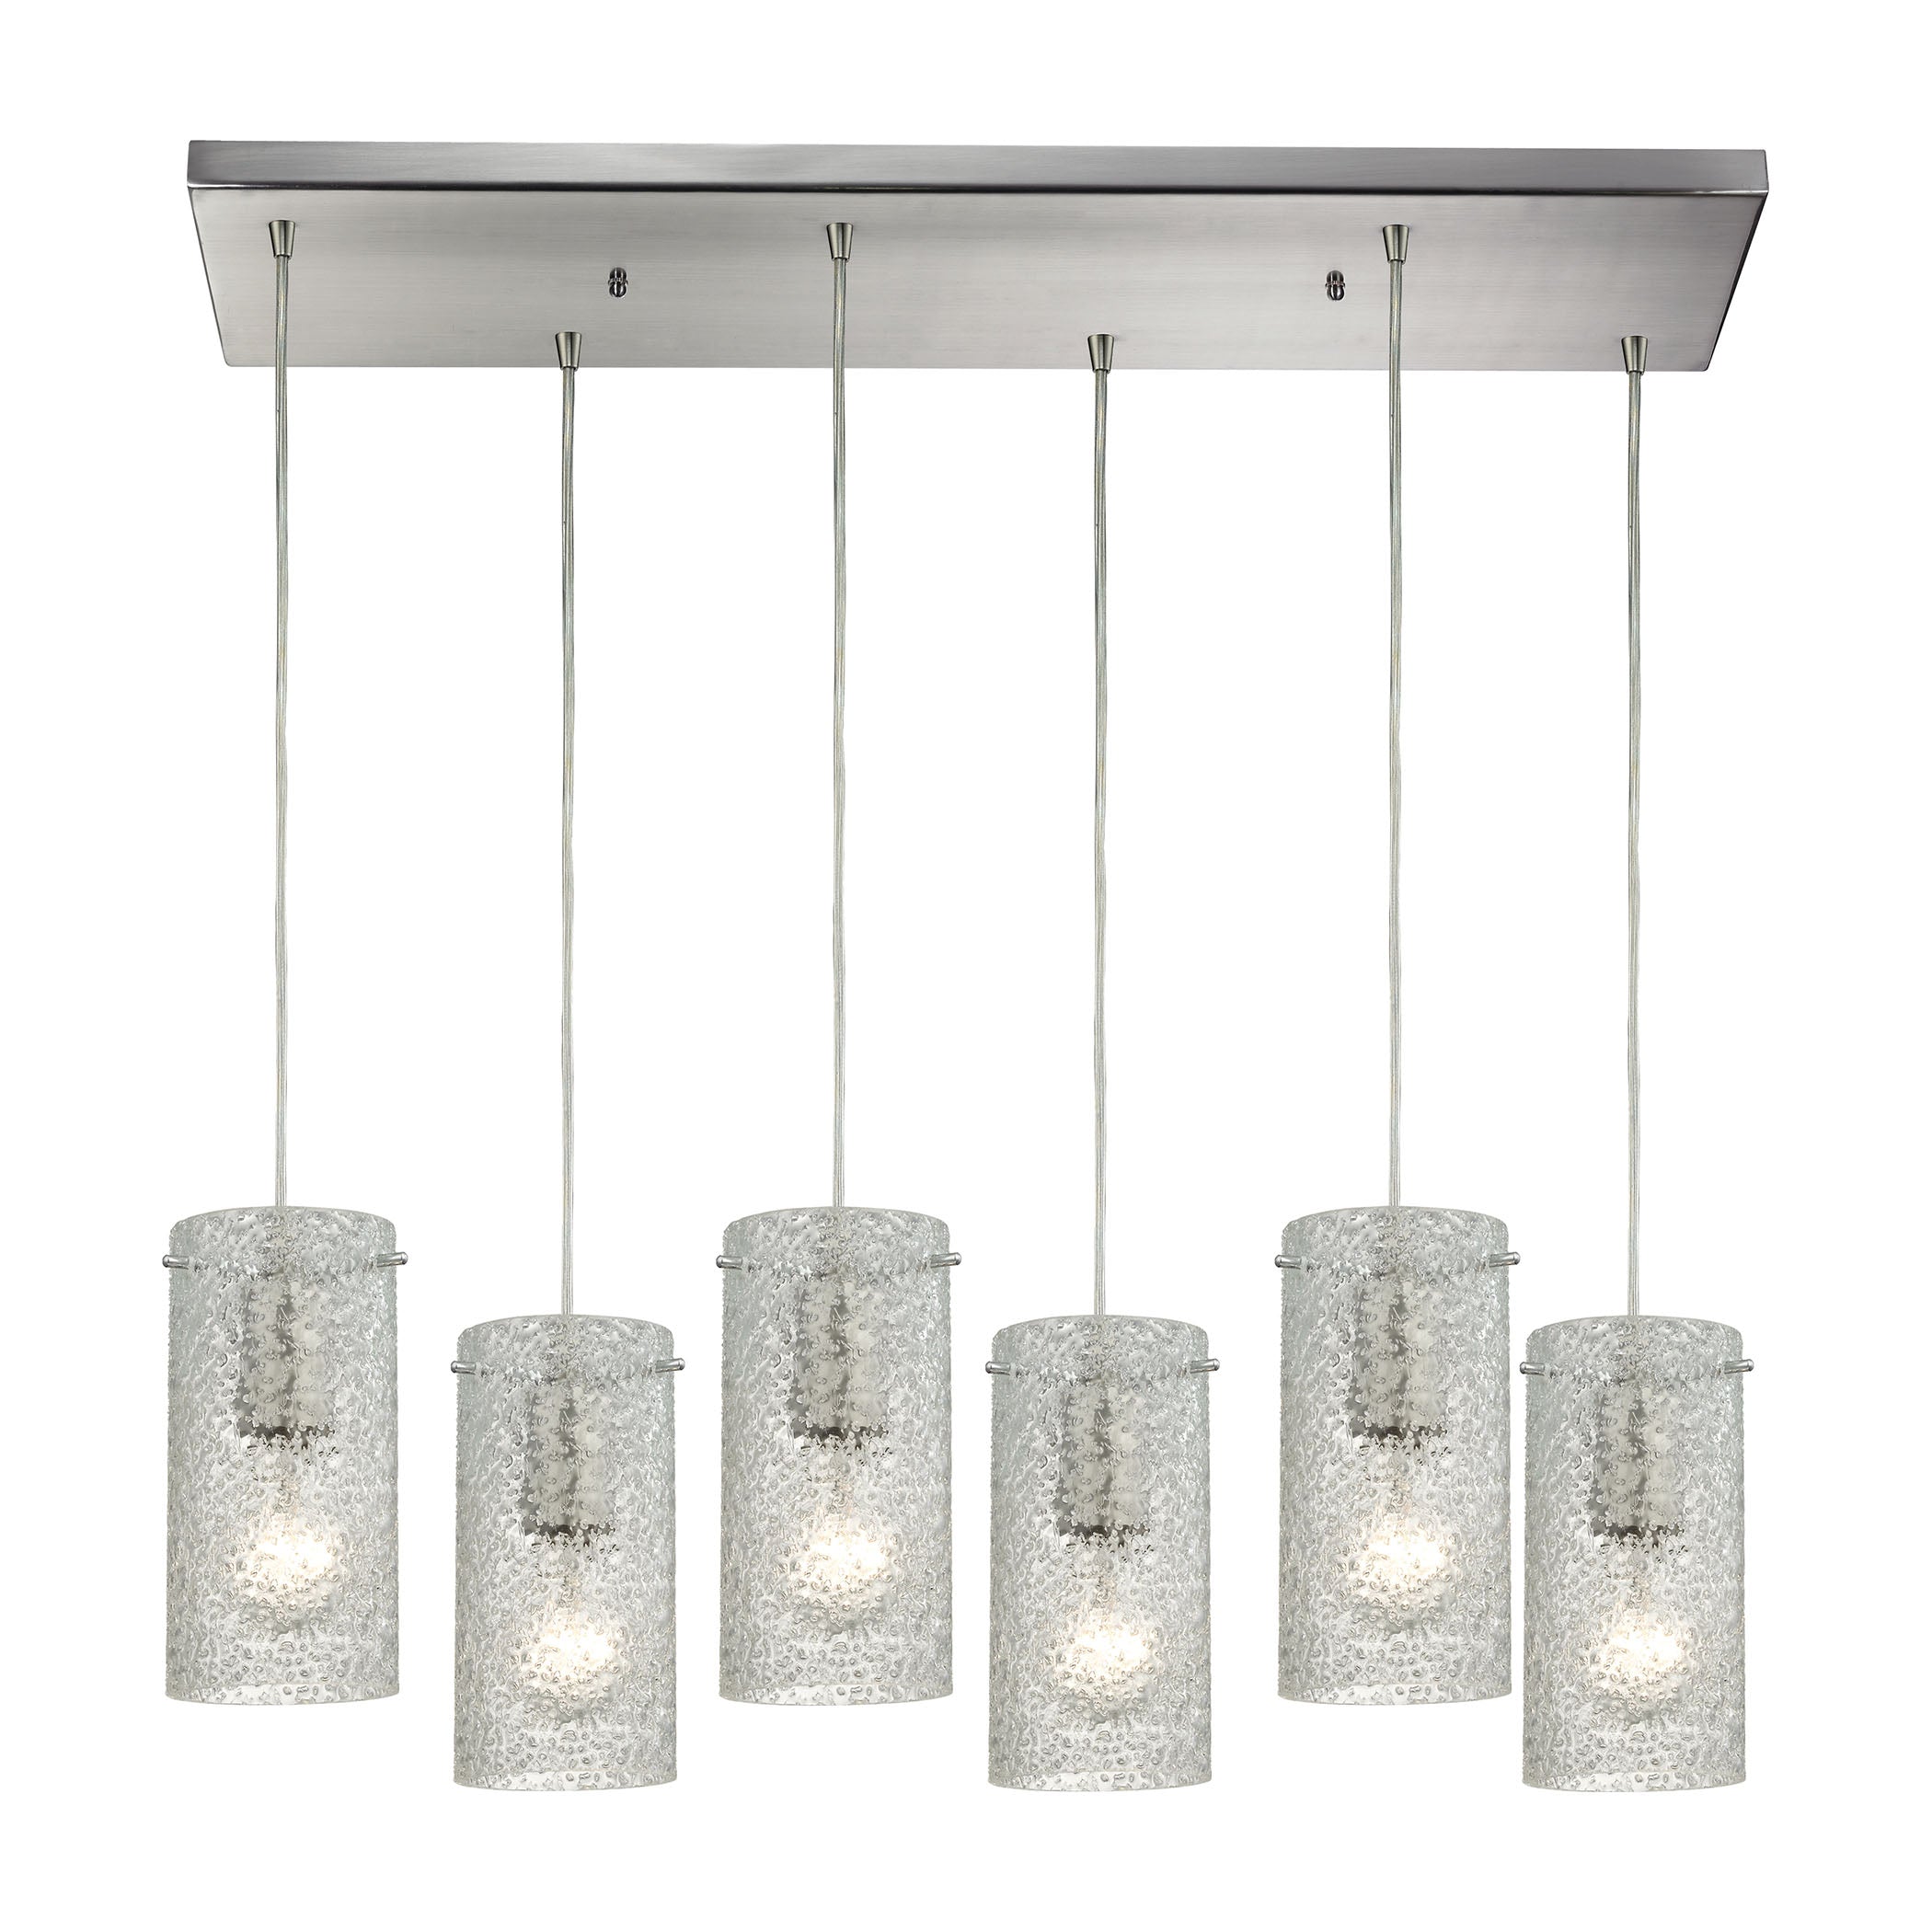 ELK Lighting 10242/6RC-CL Ice Fragments 6-Light Rectangular Pendant Fixture in Satin Nickel with Clear Glass